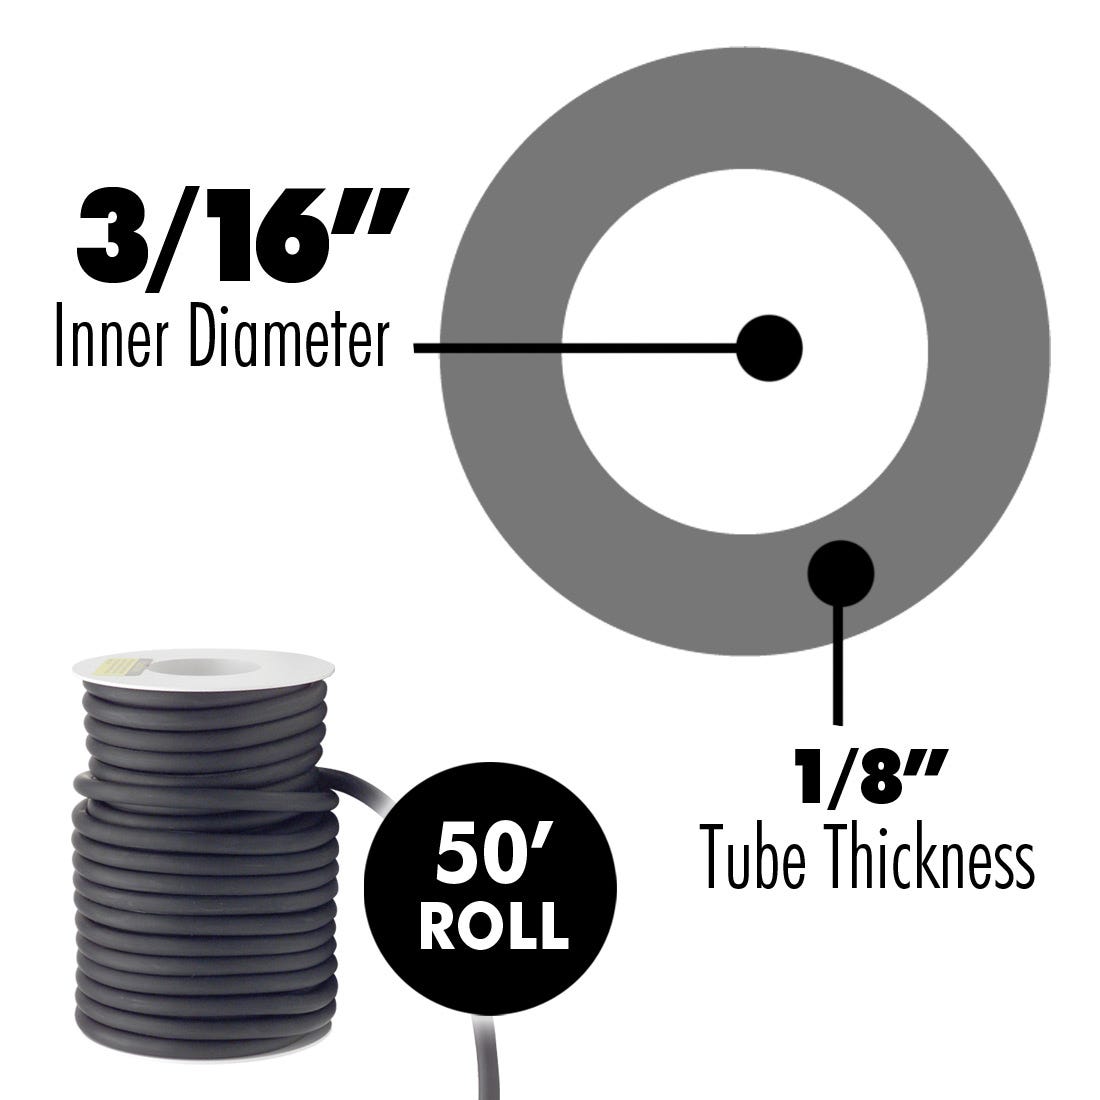 ACE Latex Rubber Tubing Black, 3/16" x 1/8"- 50' Roll